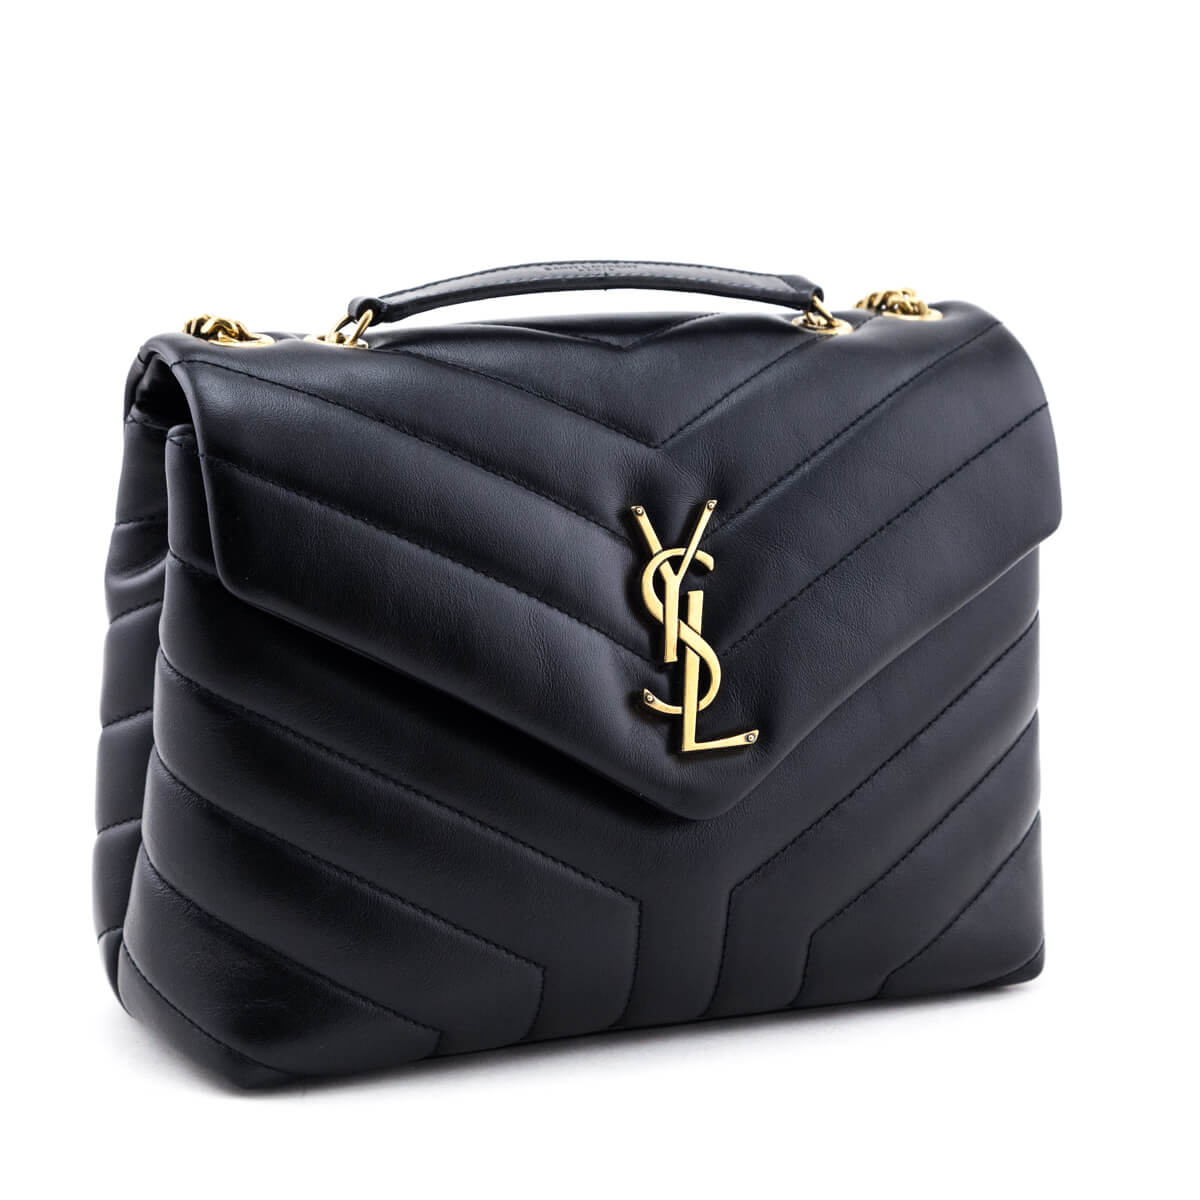 Saint Laurent Black Calfskin Y Quilted Monogram Small Loulou Chain Satchel - Love that Bag etc - Preowned Authentic Designer Handbags & Preloved Fashions